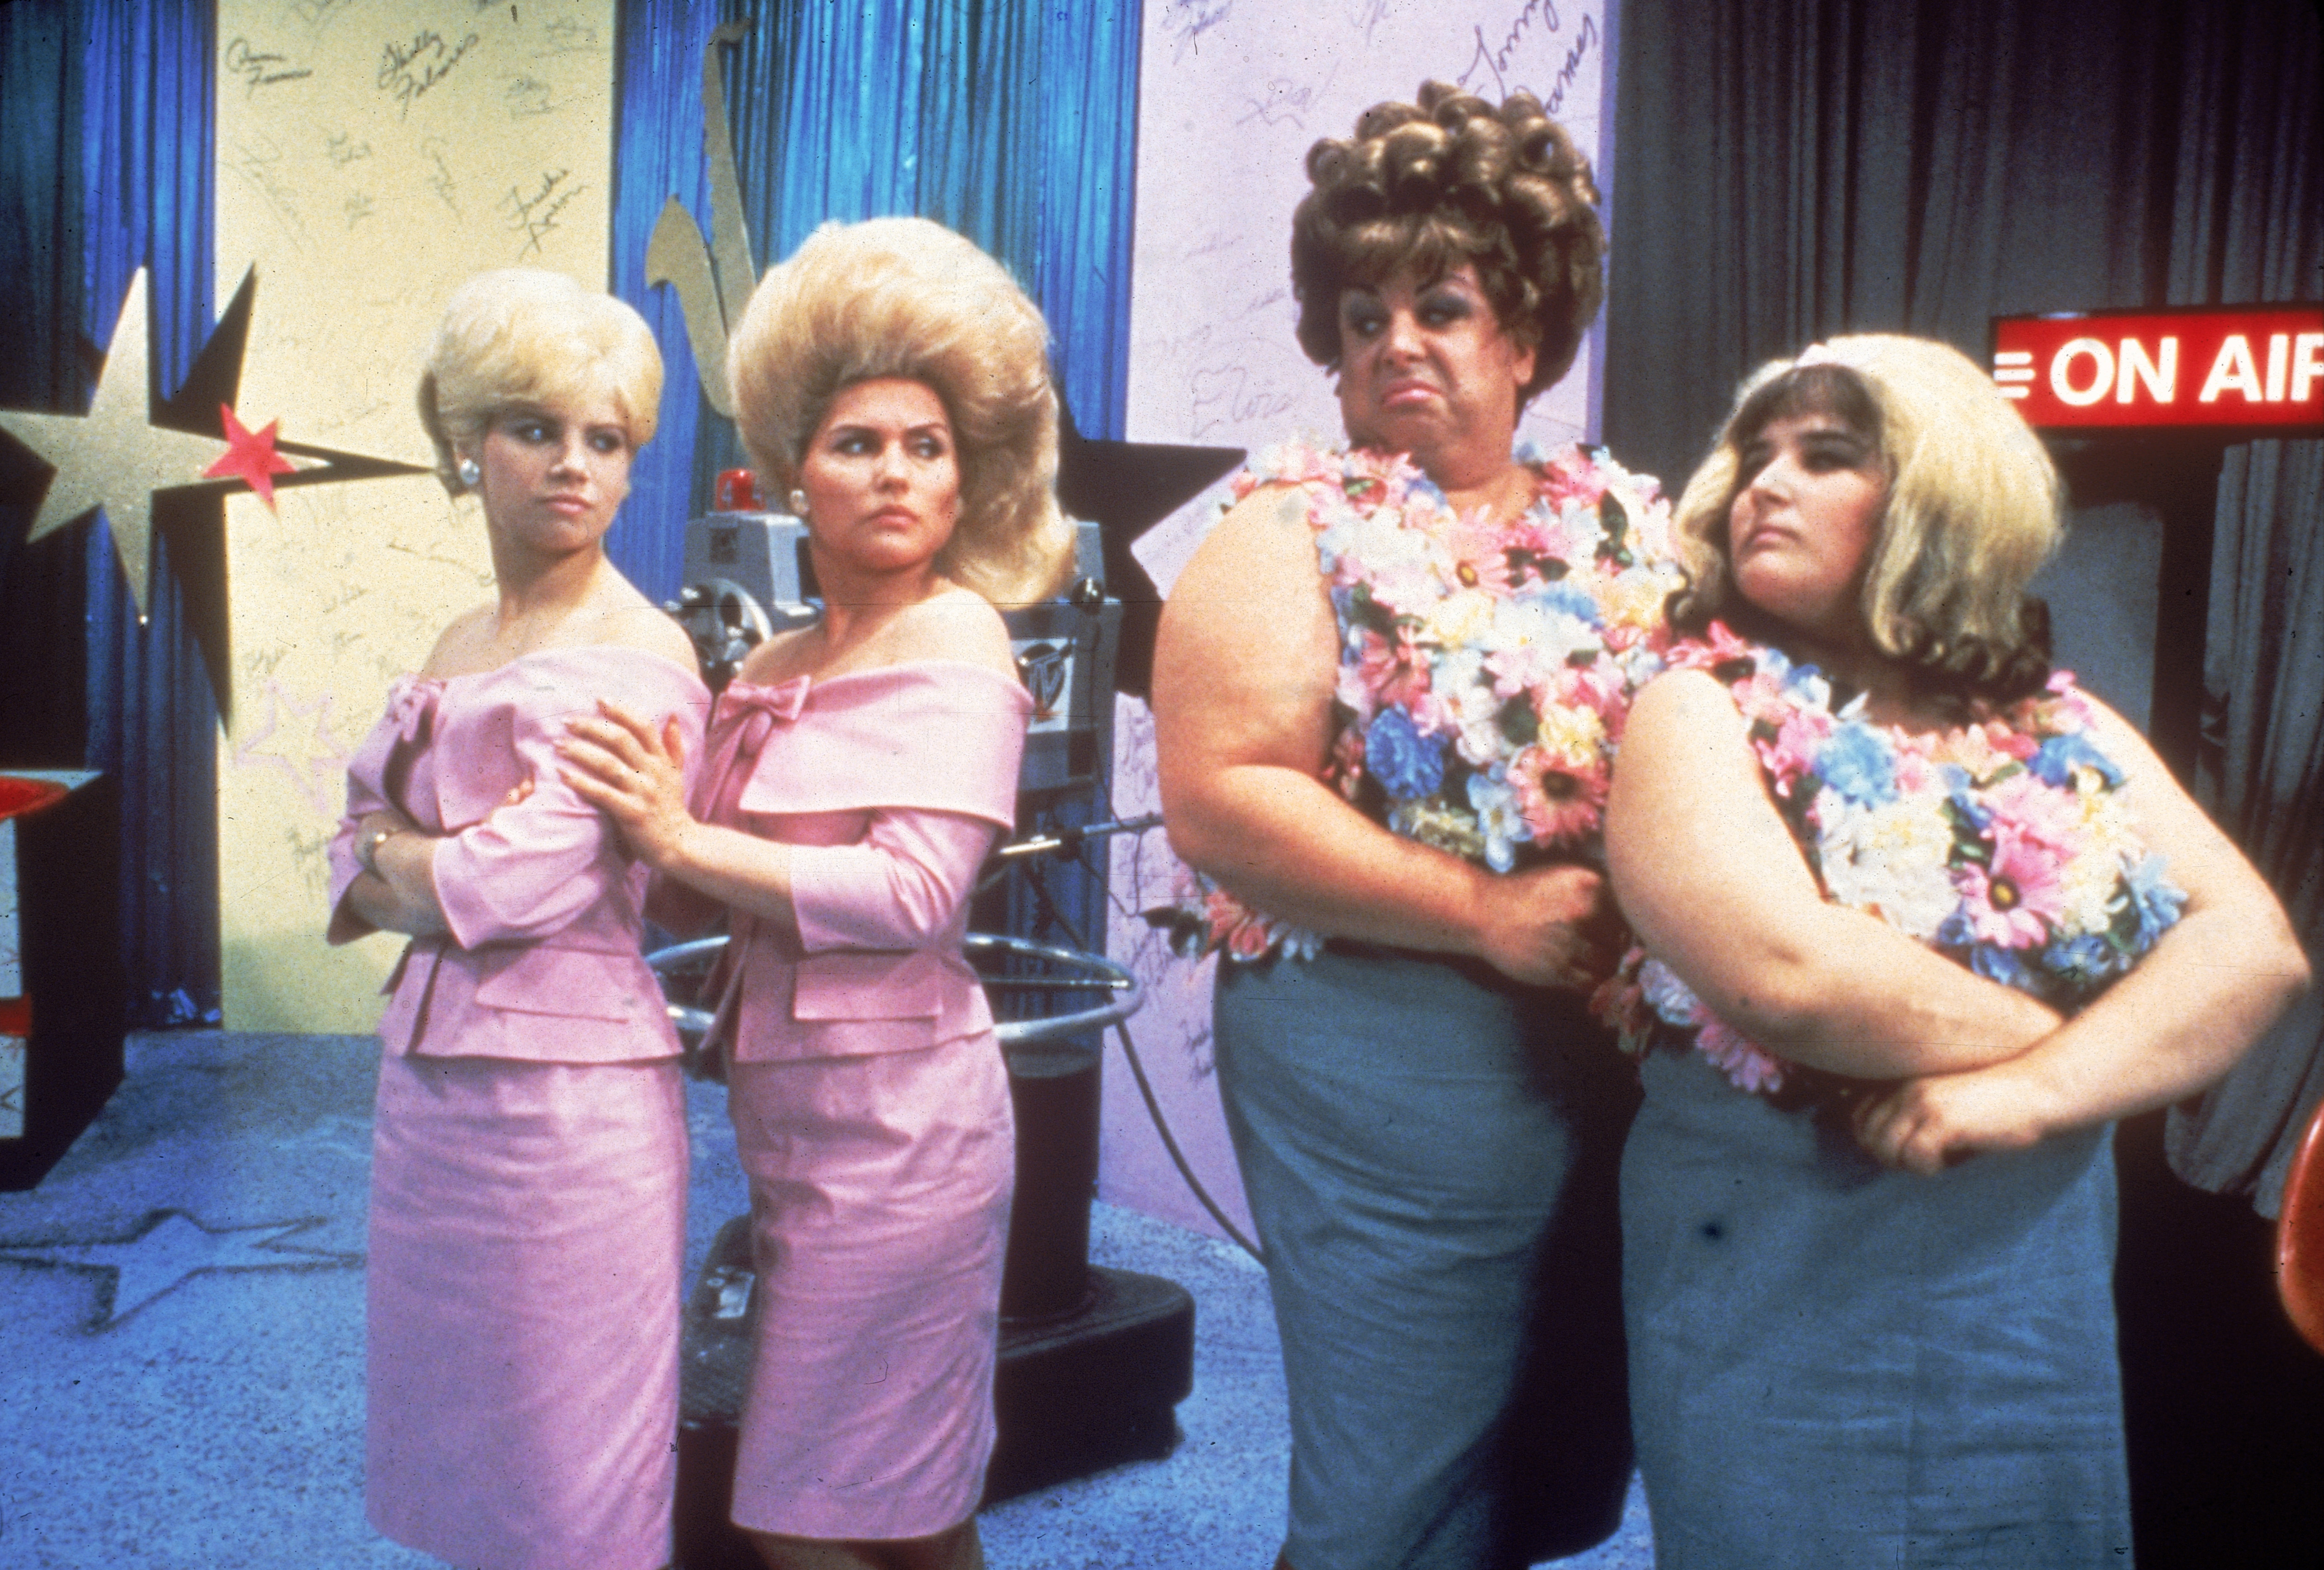 Colleen Fitzpatrick, Debbie Harry, Divine, and Ricki Lake in a scene from 'Hairspray,' in 1988. | Source: Getty Images